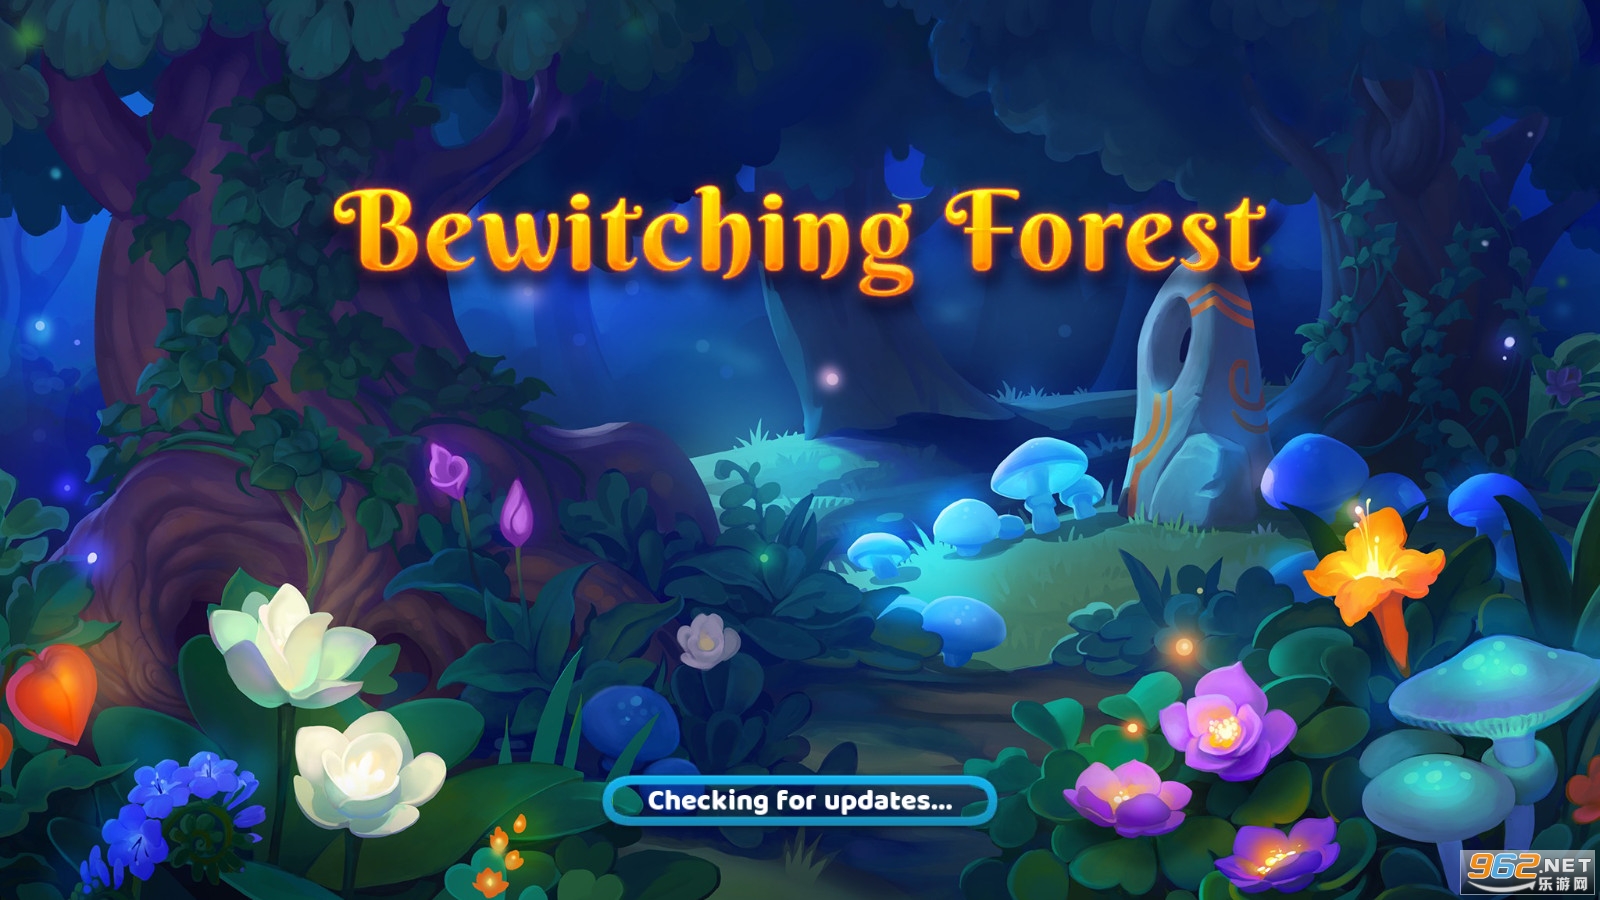 Bewitching Forest(˵ɭBewitchingForest)v0.1.742°؈D2